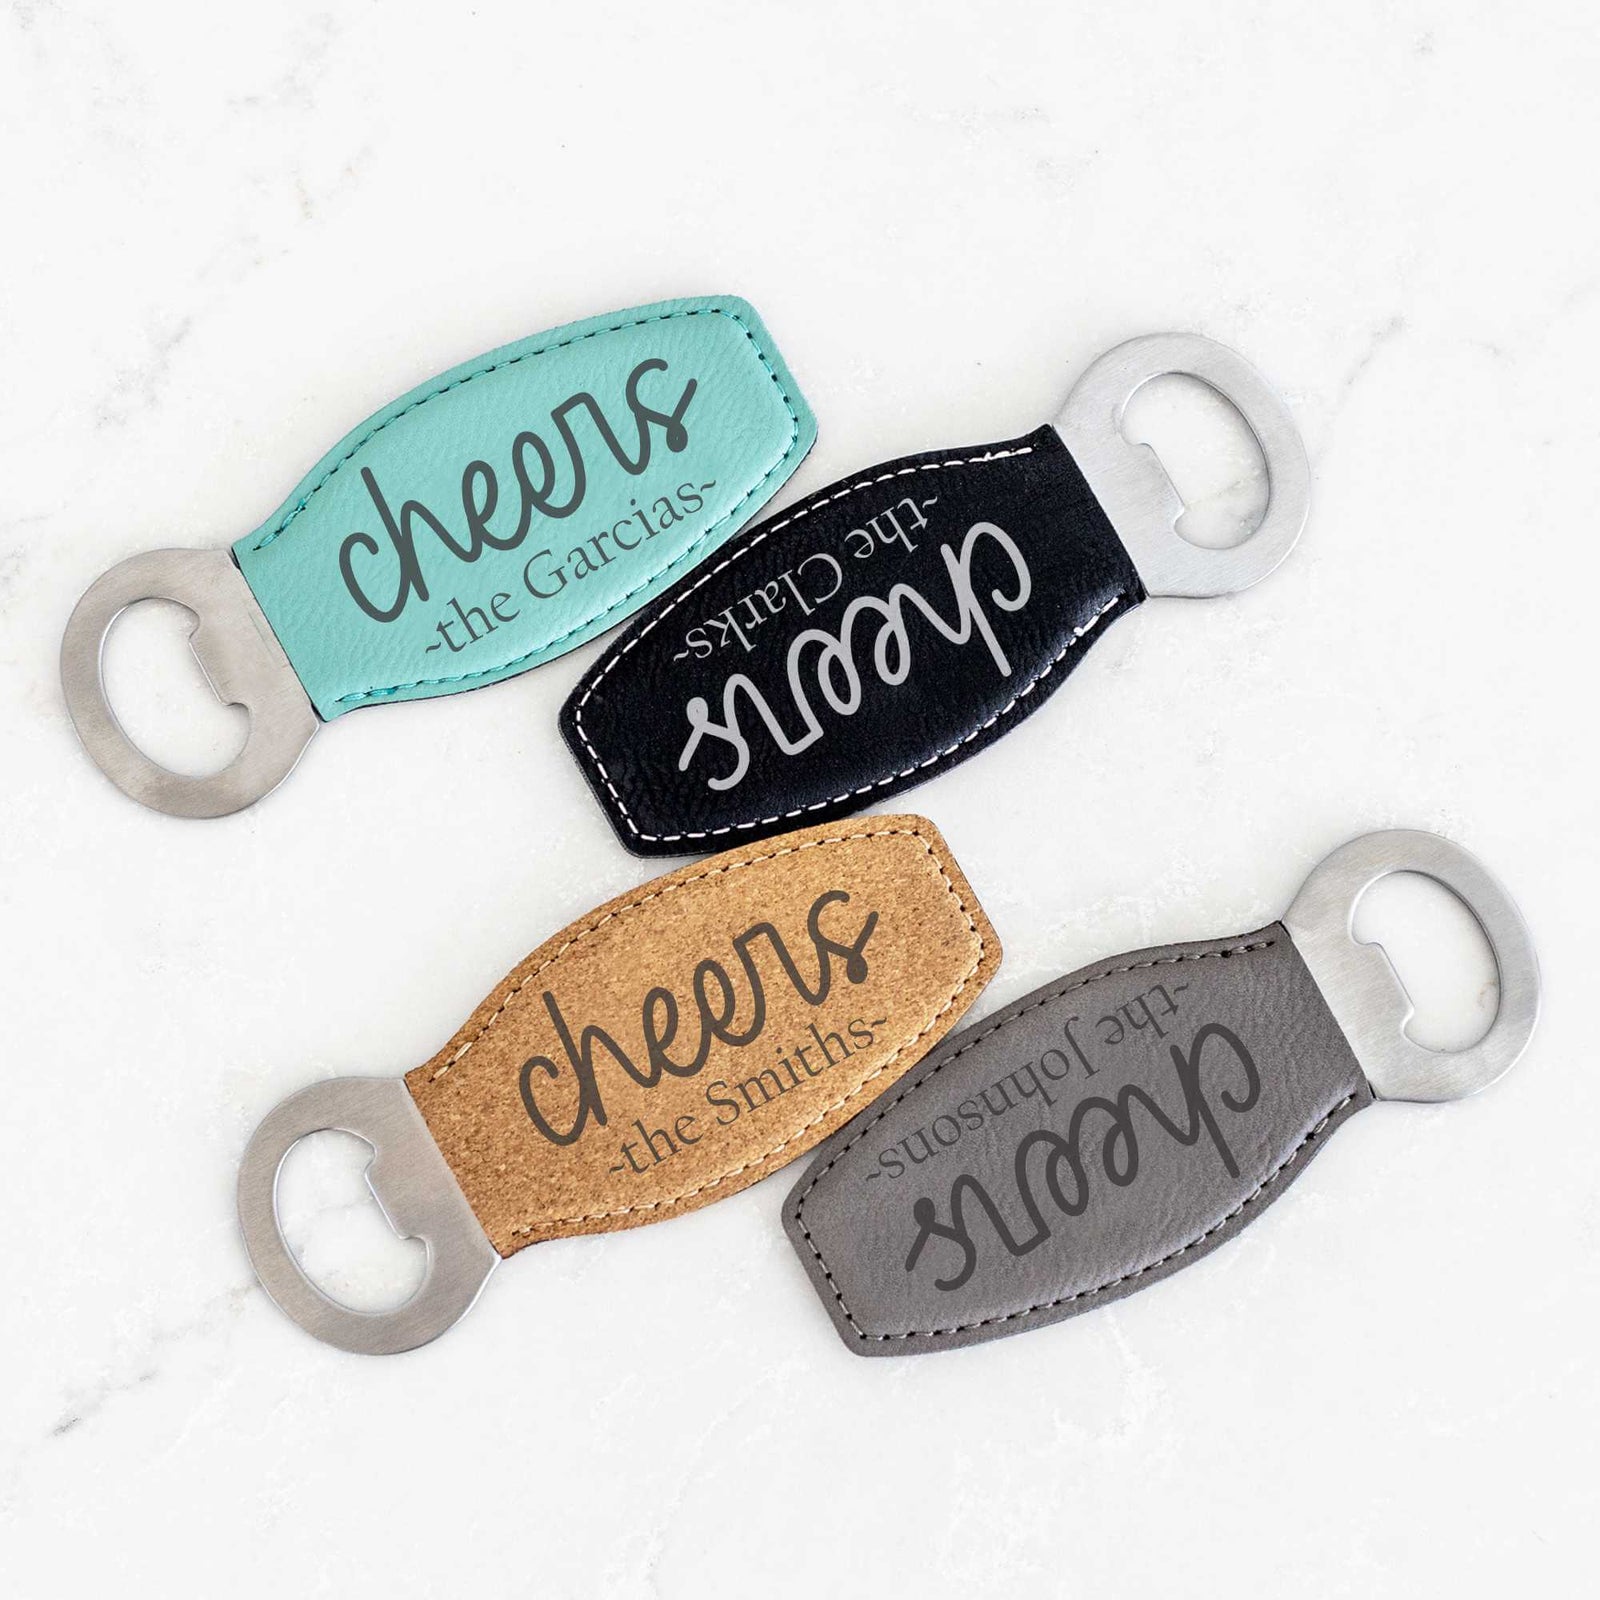 https://cdn.shopify.com/s/files/1/0570/4935/0281/files/Cheers-Bottle-Opener-With-Magnet-All-Colors-Shown_1600x.jpg?v=1684514435